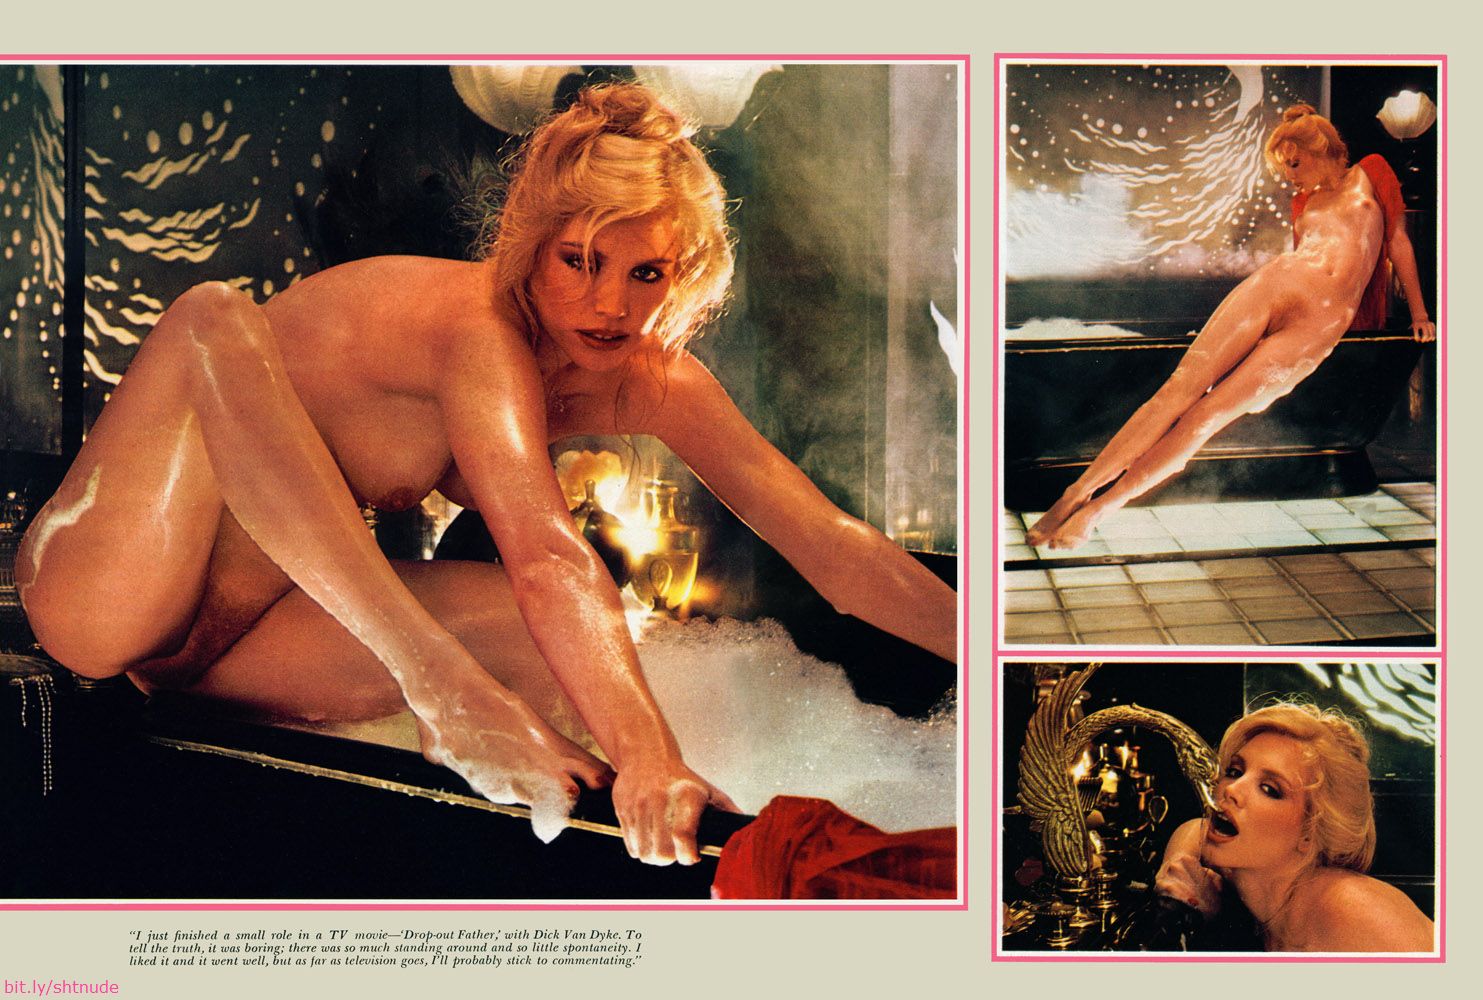 Shannon Tweed was Playmate of the year in 1982 and she did many photoshoots...